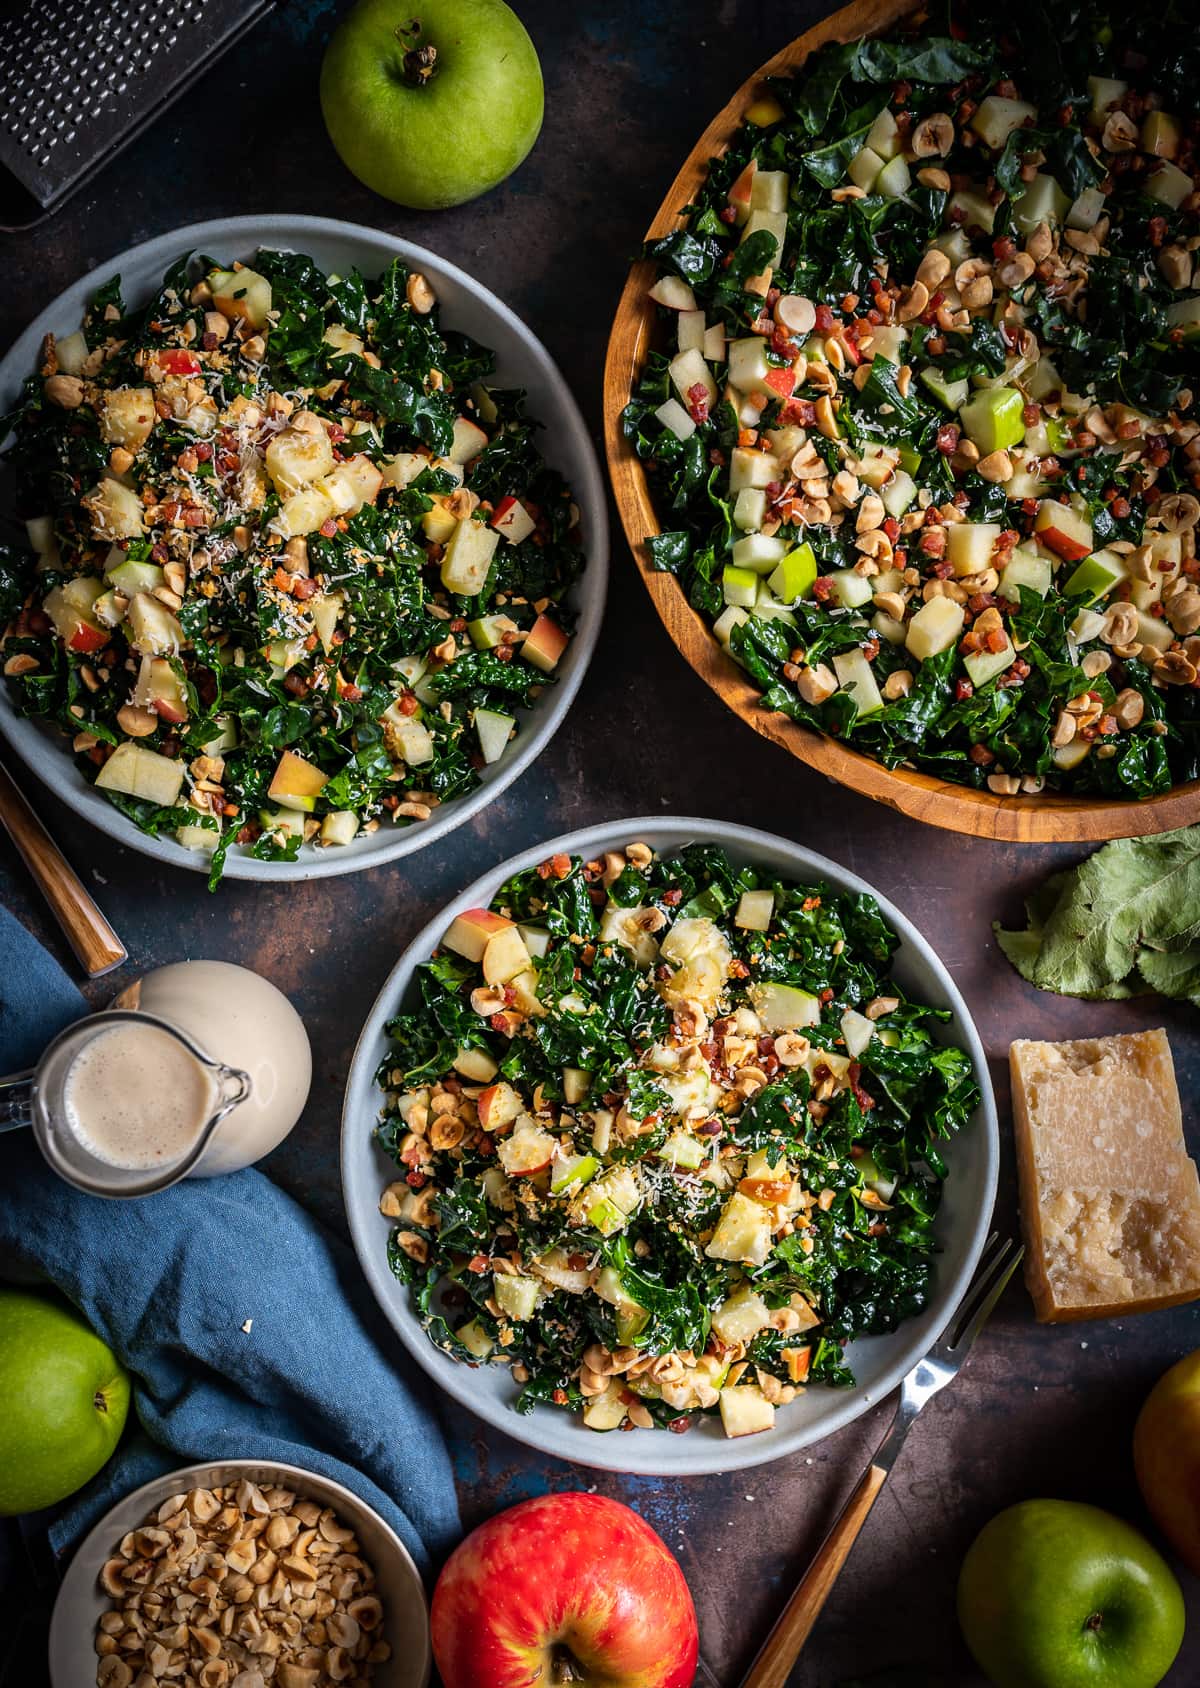 bowls of chopped kale salad with diced apples, hazelnuts, whole apples whole piece of parmesan cheese bottle of vinaigrette